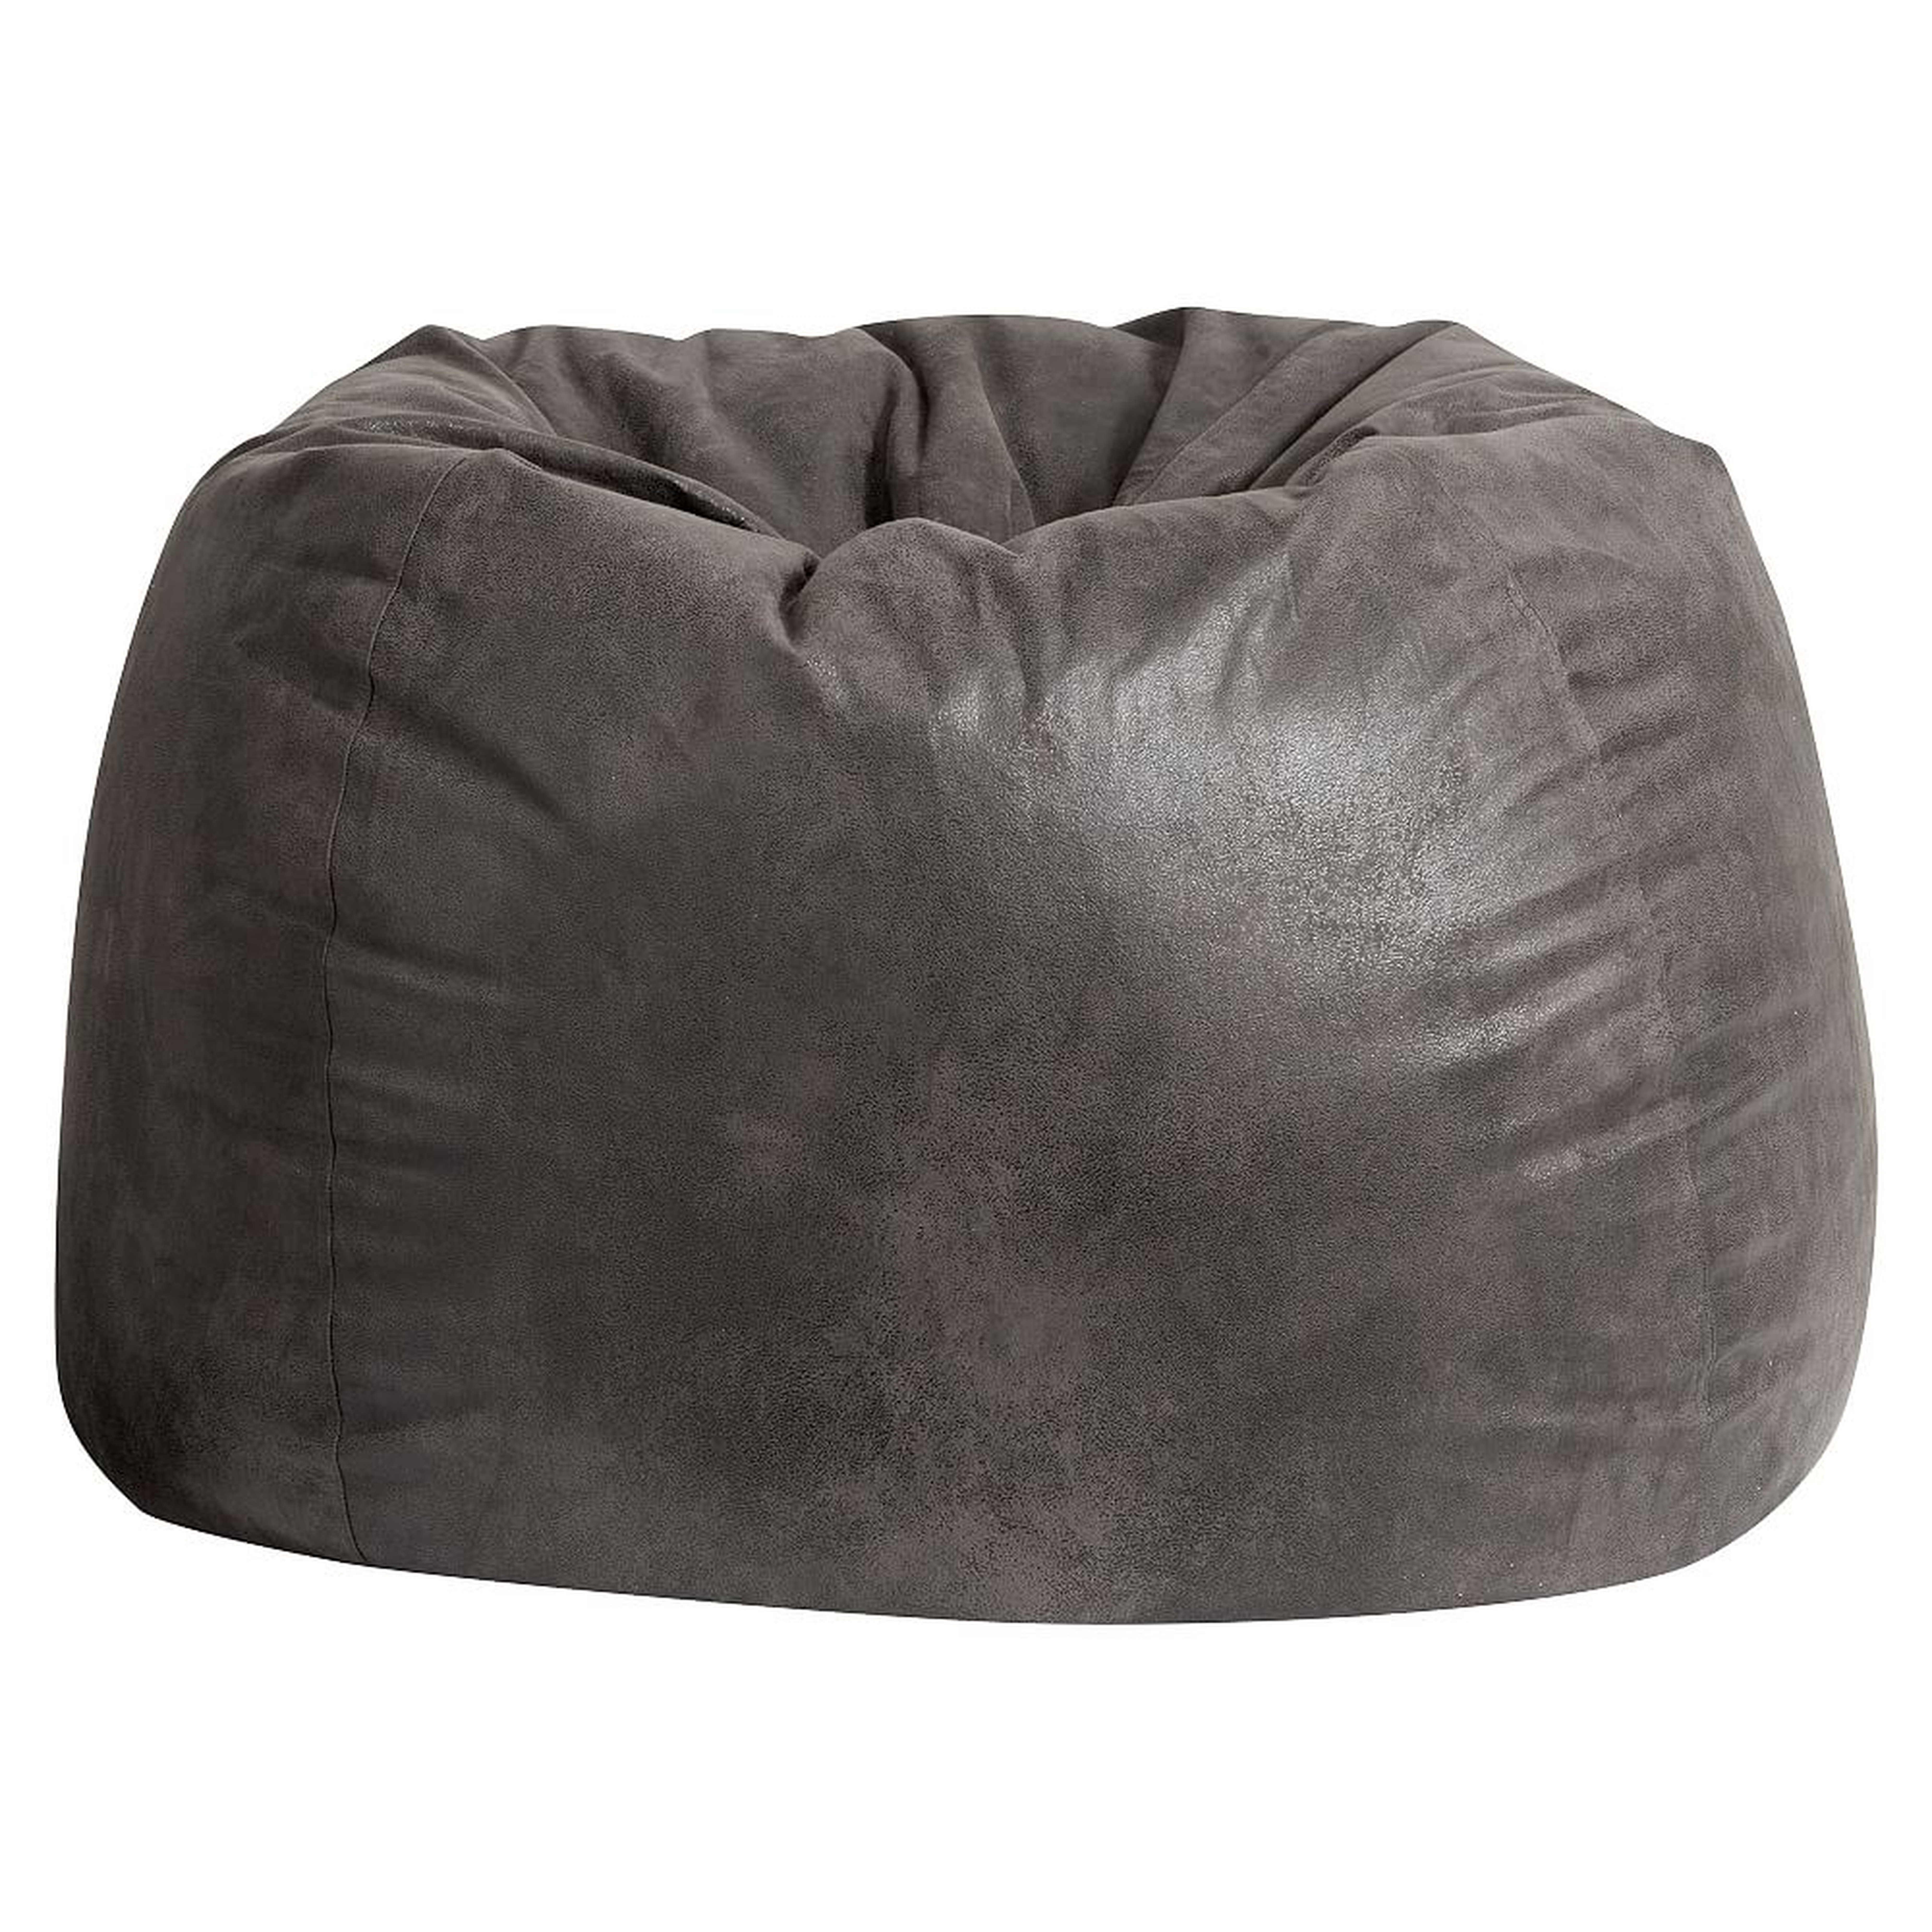 Faux-Suede Bean Bag Chair Slipcover + Insert, Charcoal/Gray, Large - Pottery Barn Teen